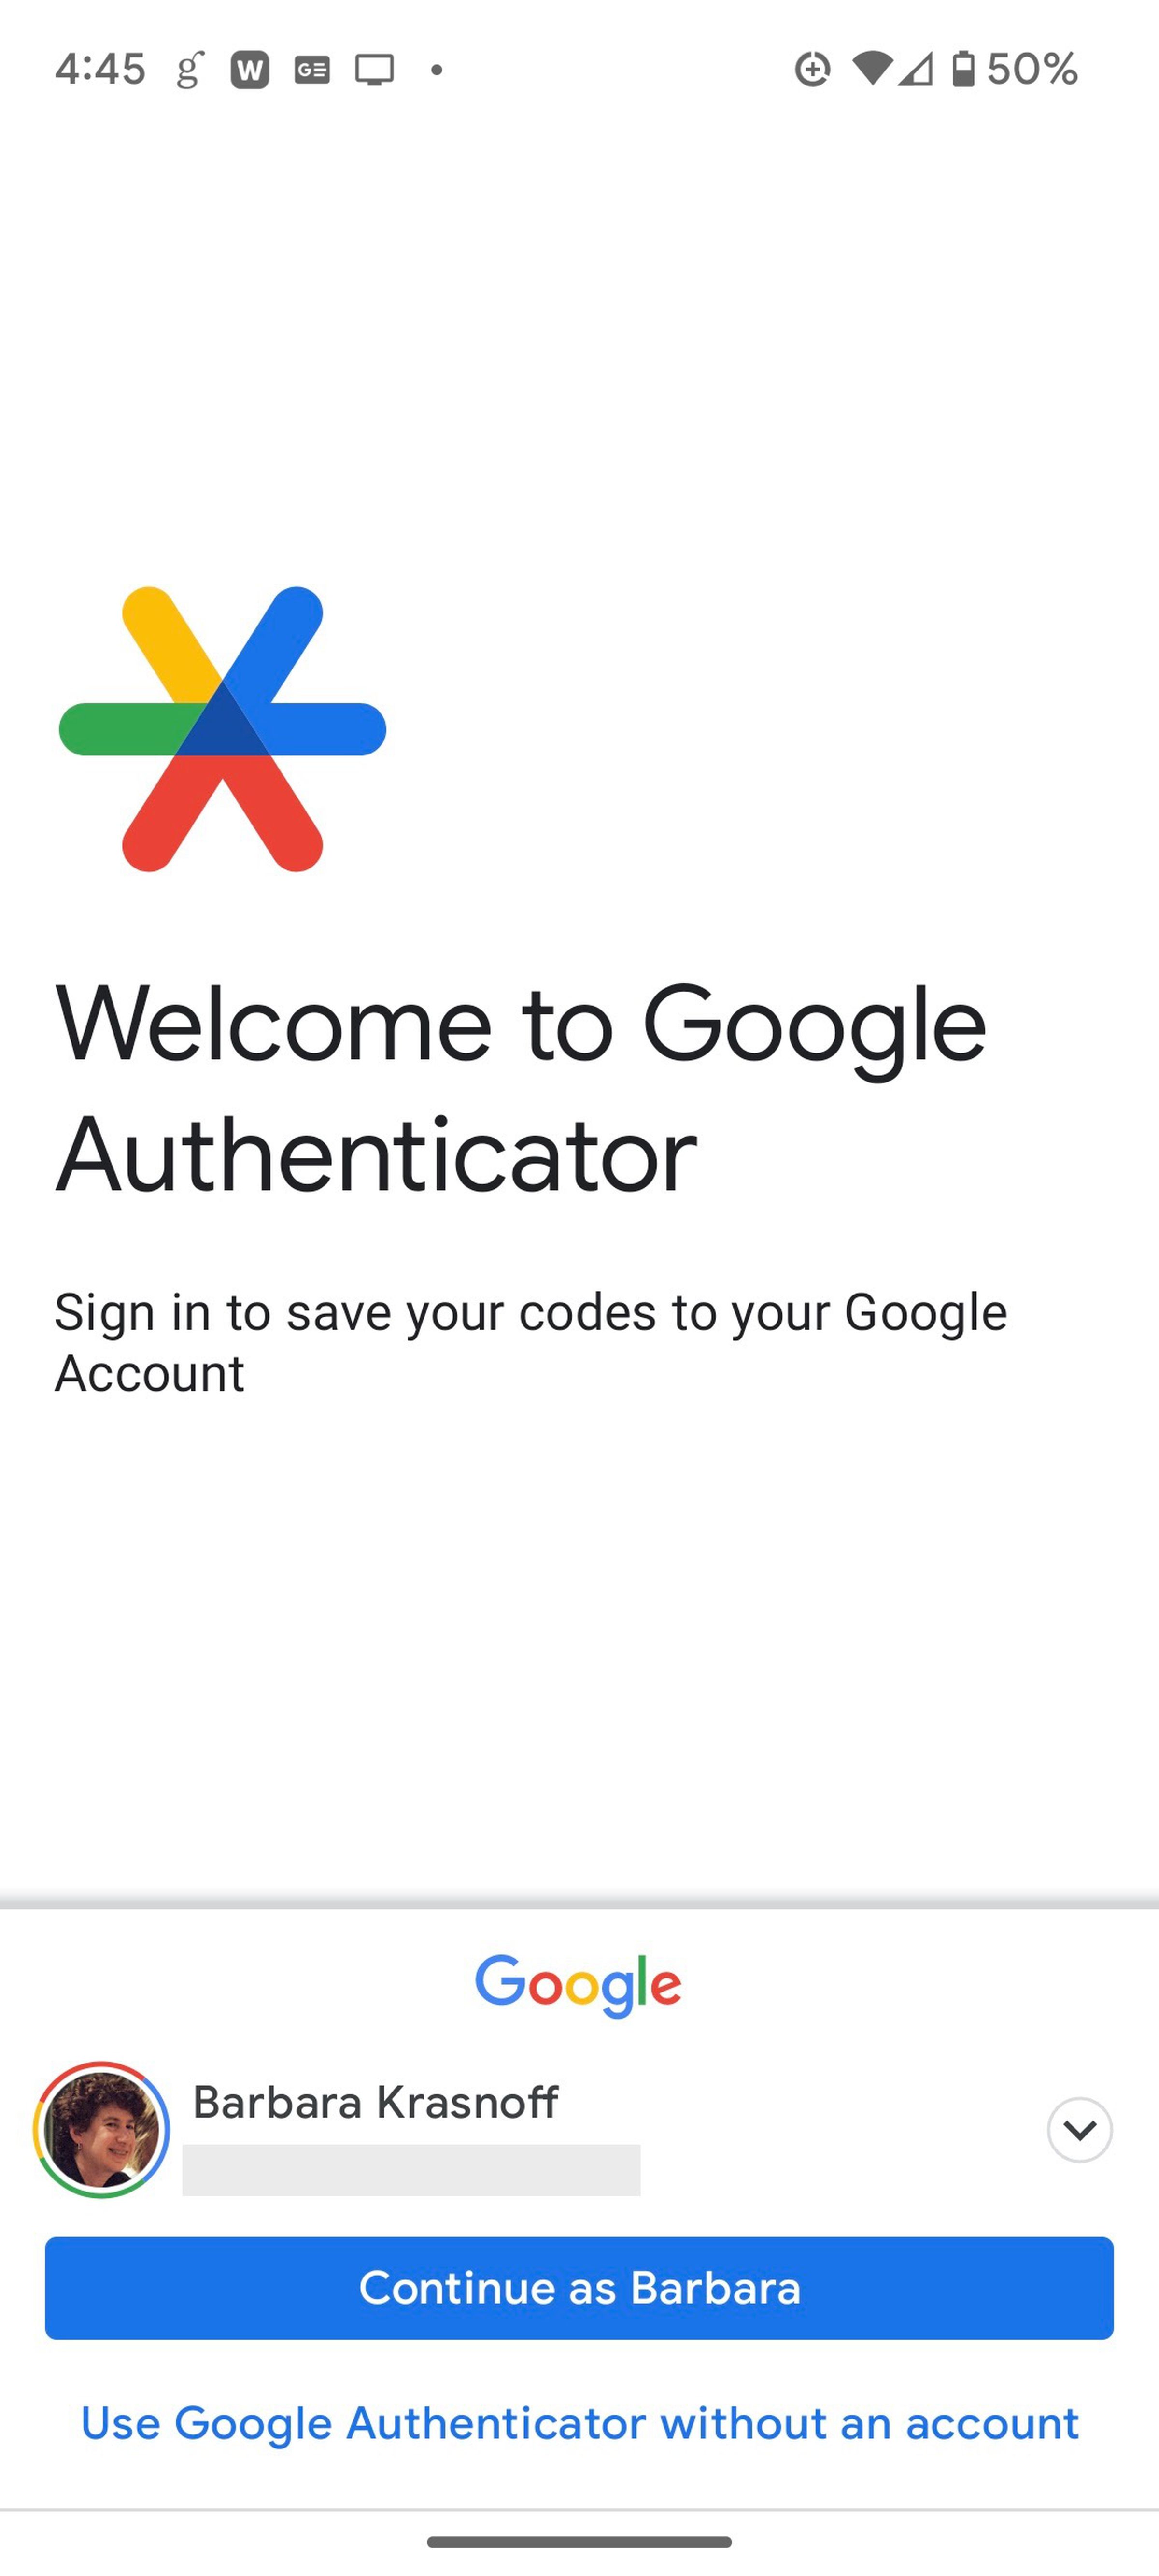 A page with a multicolor starburst, the words “Welcome to Google Authenticator” then “Sign in to save your codes to your Google Account” and then a Google sign-in at the bottom.